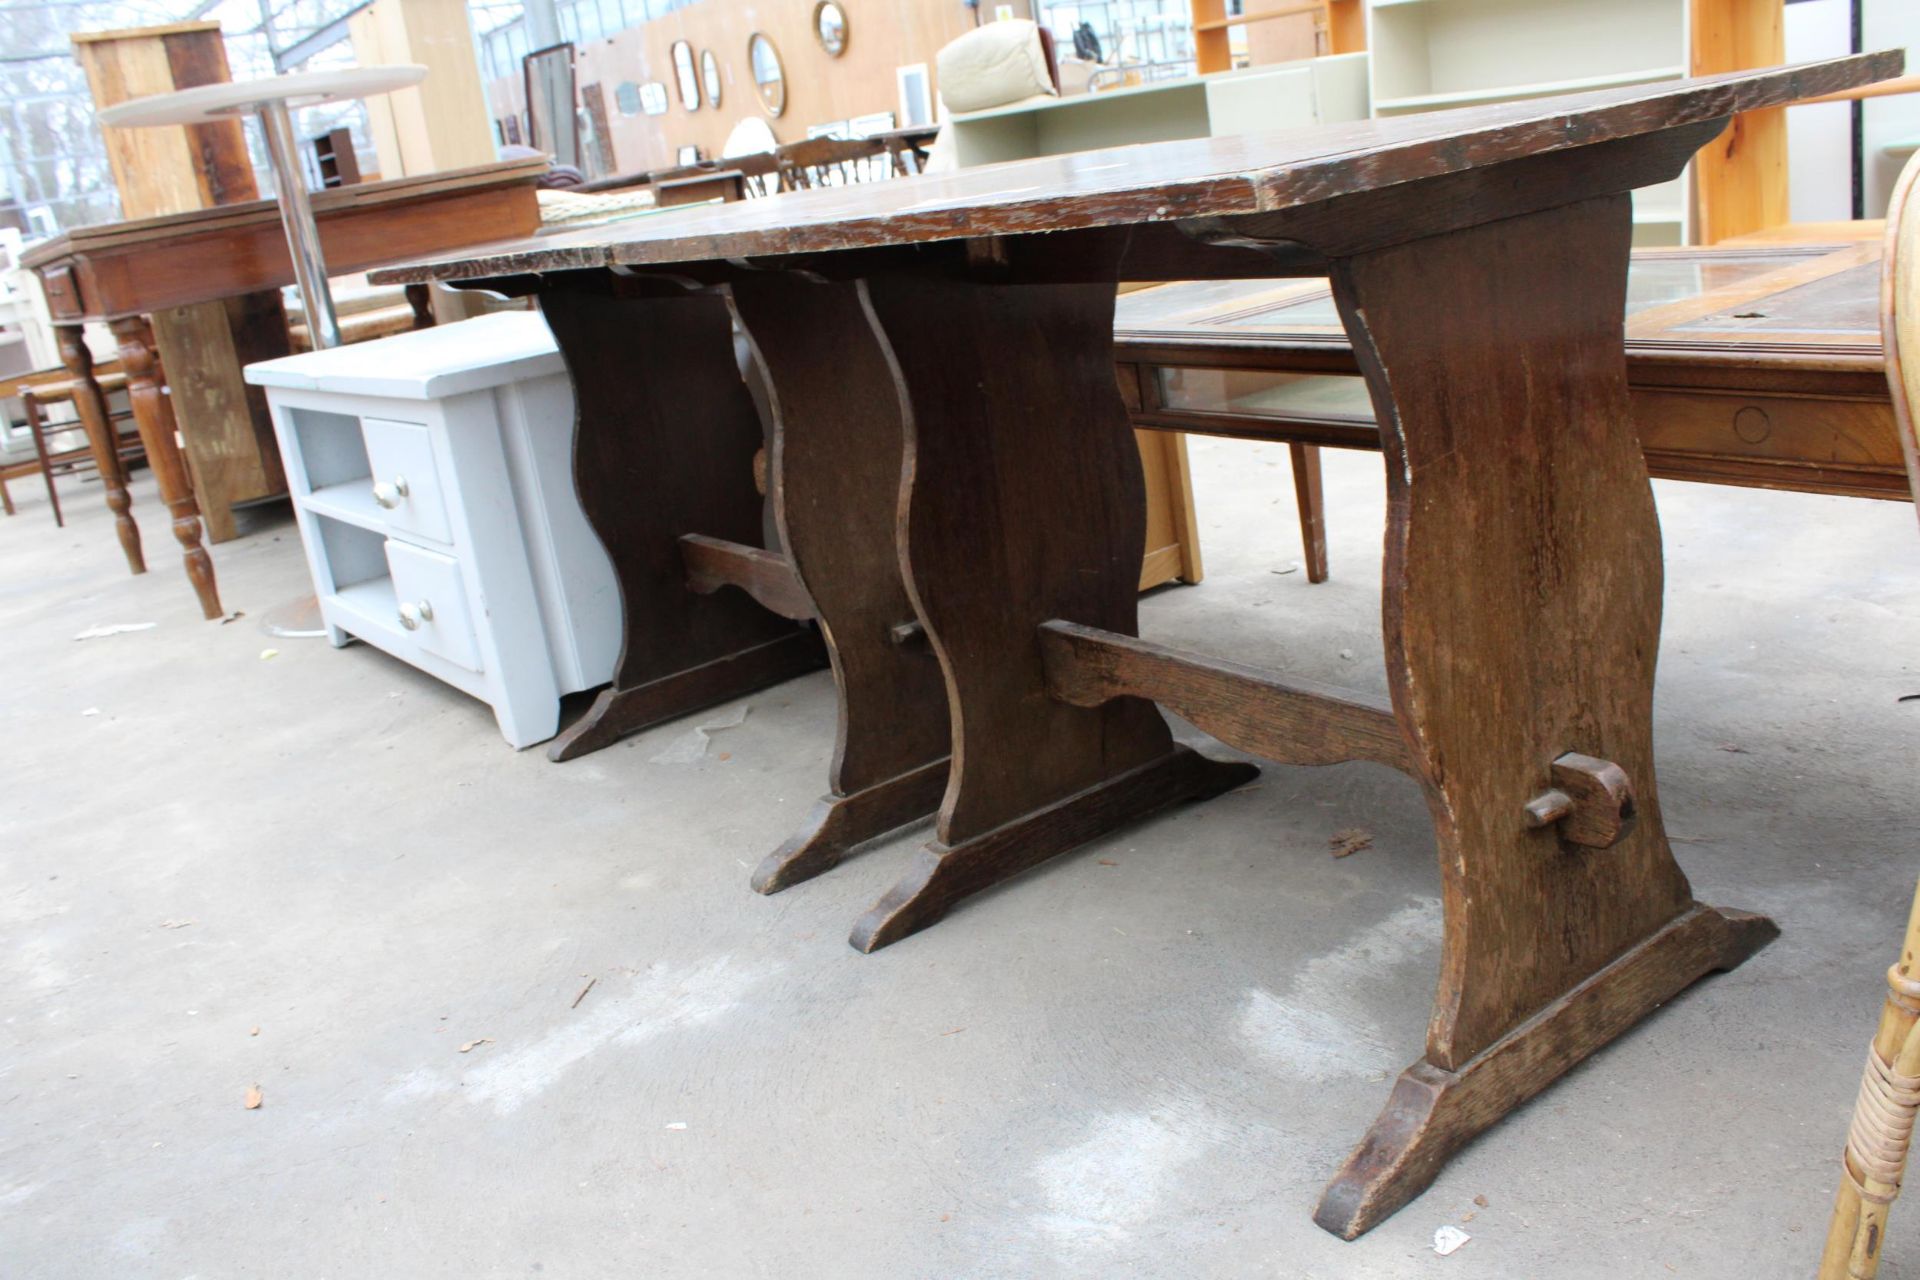 A PAIR OF MODERN PUB TABLES, 30" X 24" EACH - Image 2 of 2